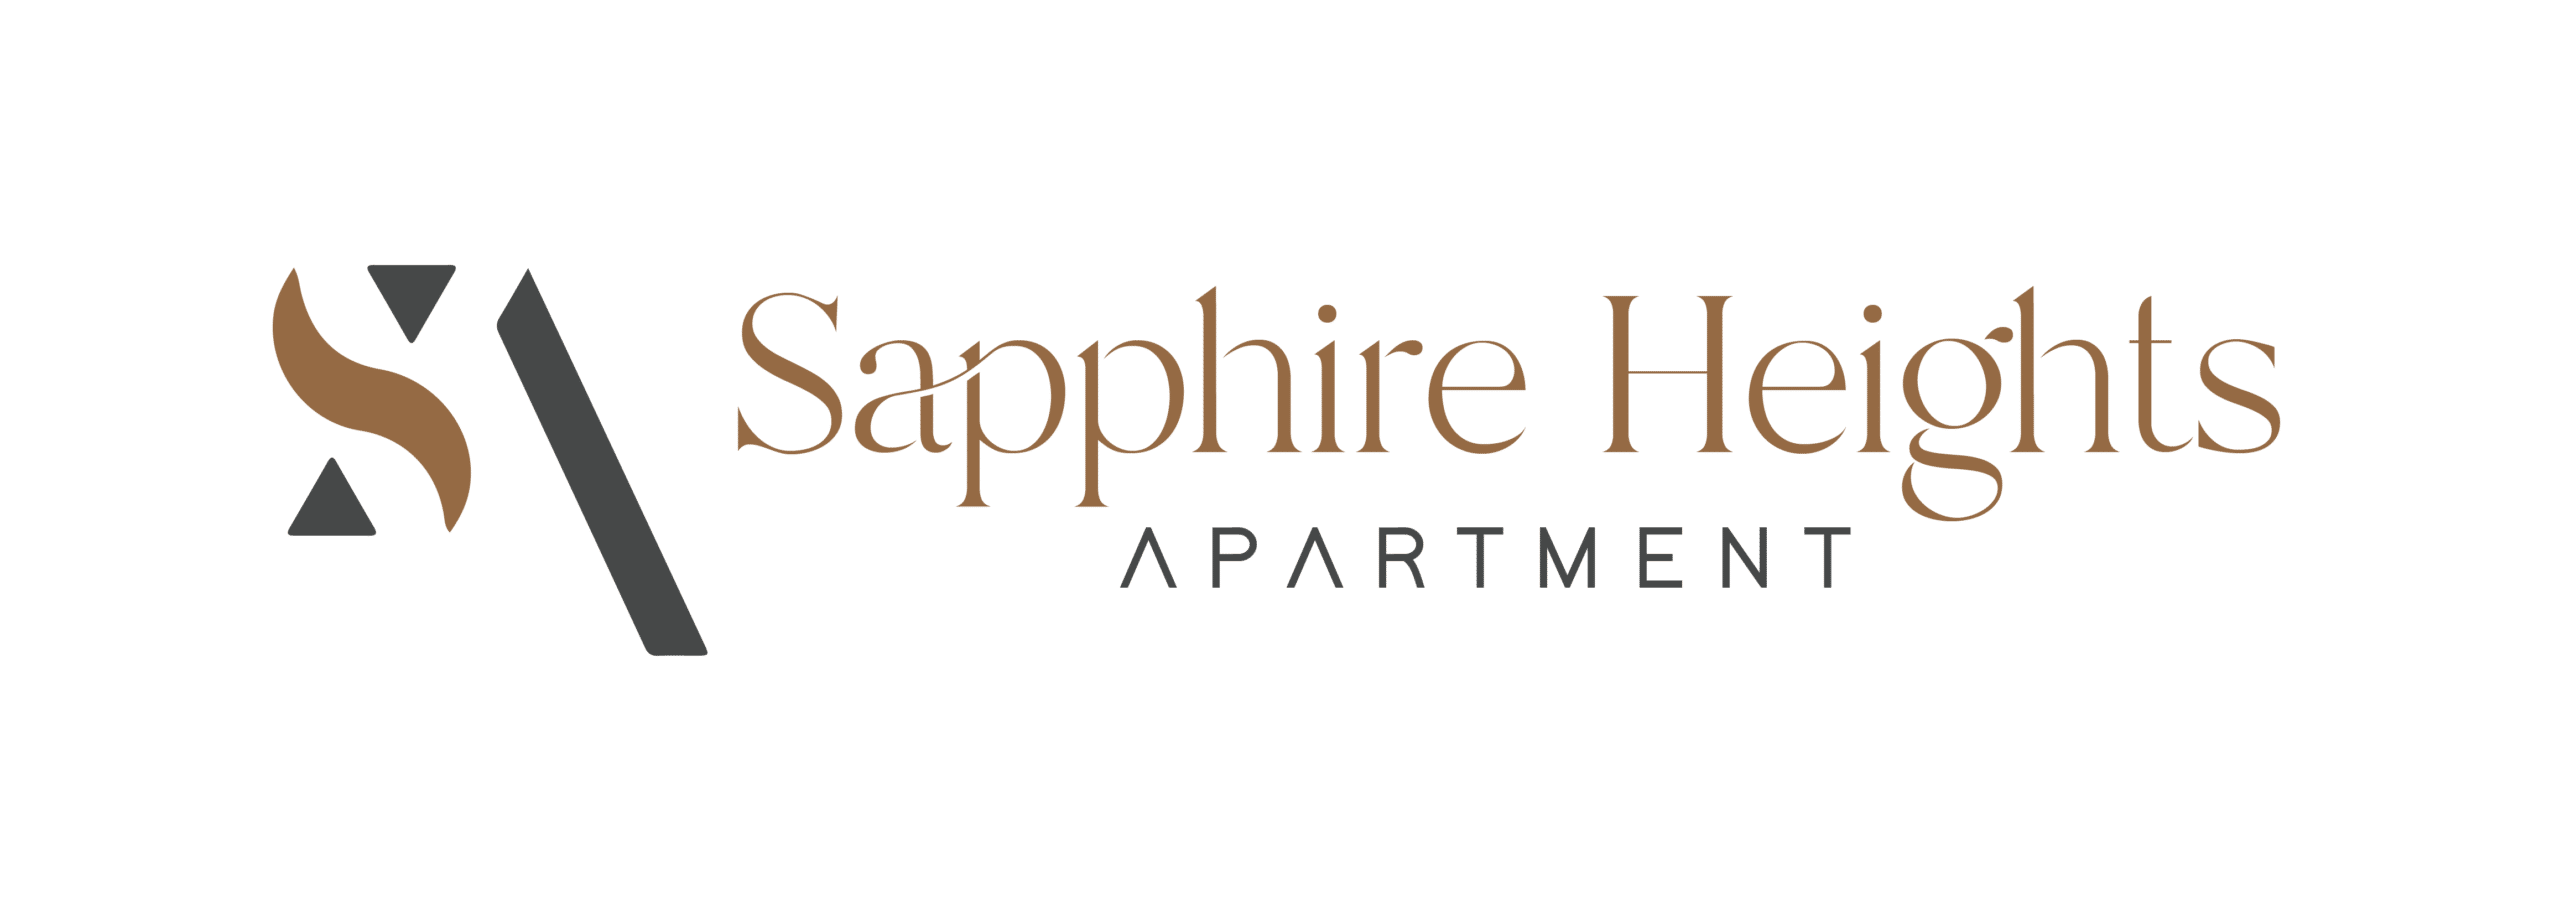 Sapphire Heights Apartment